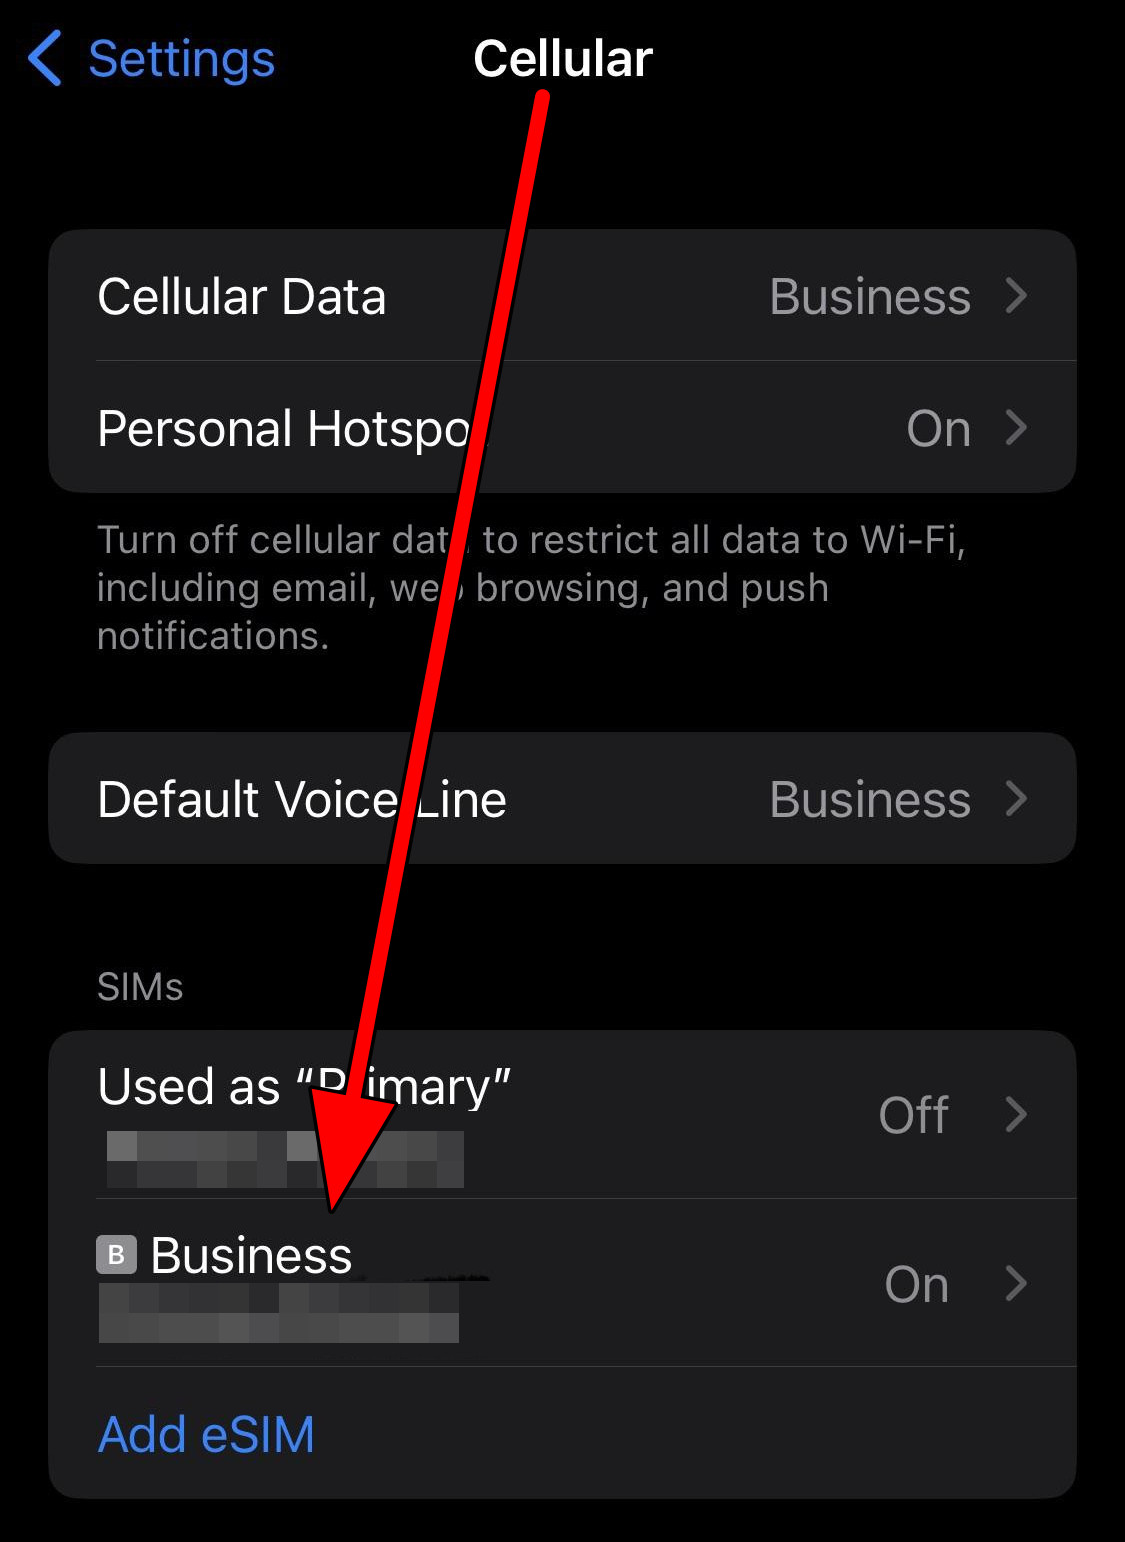 Enable the Required SIM in the Cellular Settings of the iPhone